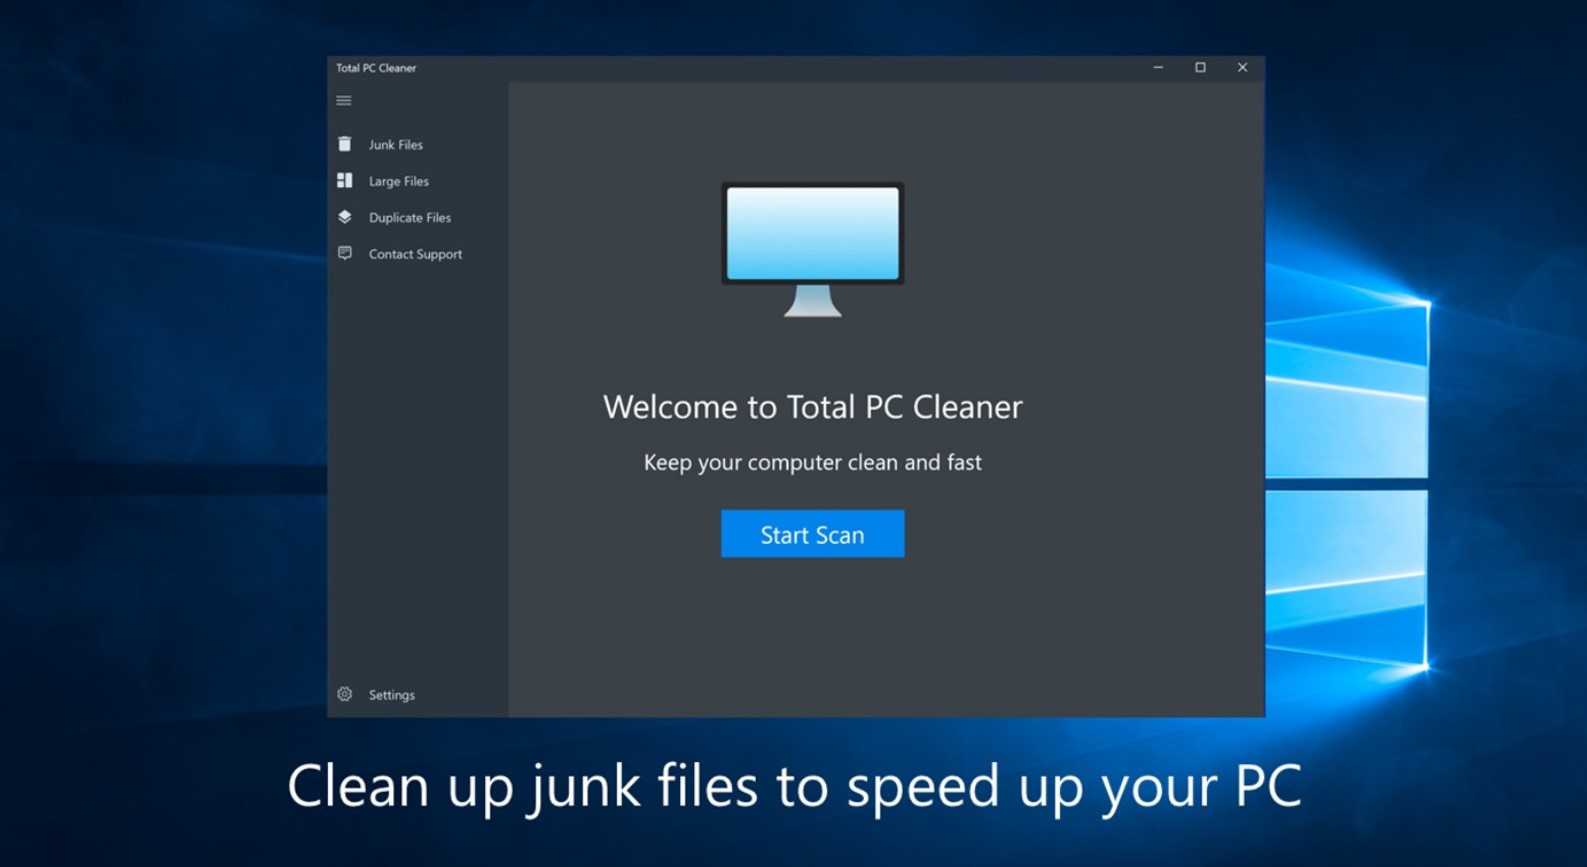 PC Cleaner. Windows Cleaner. Clean PC. Cleaner my PC. Clean на пк